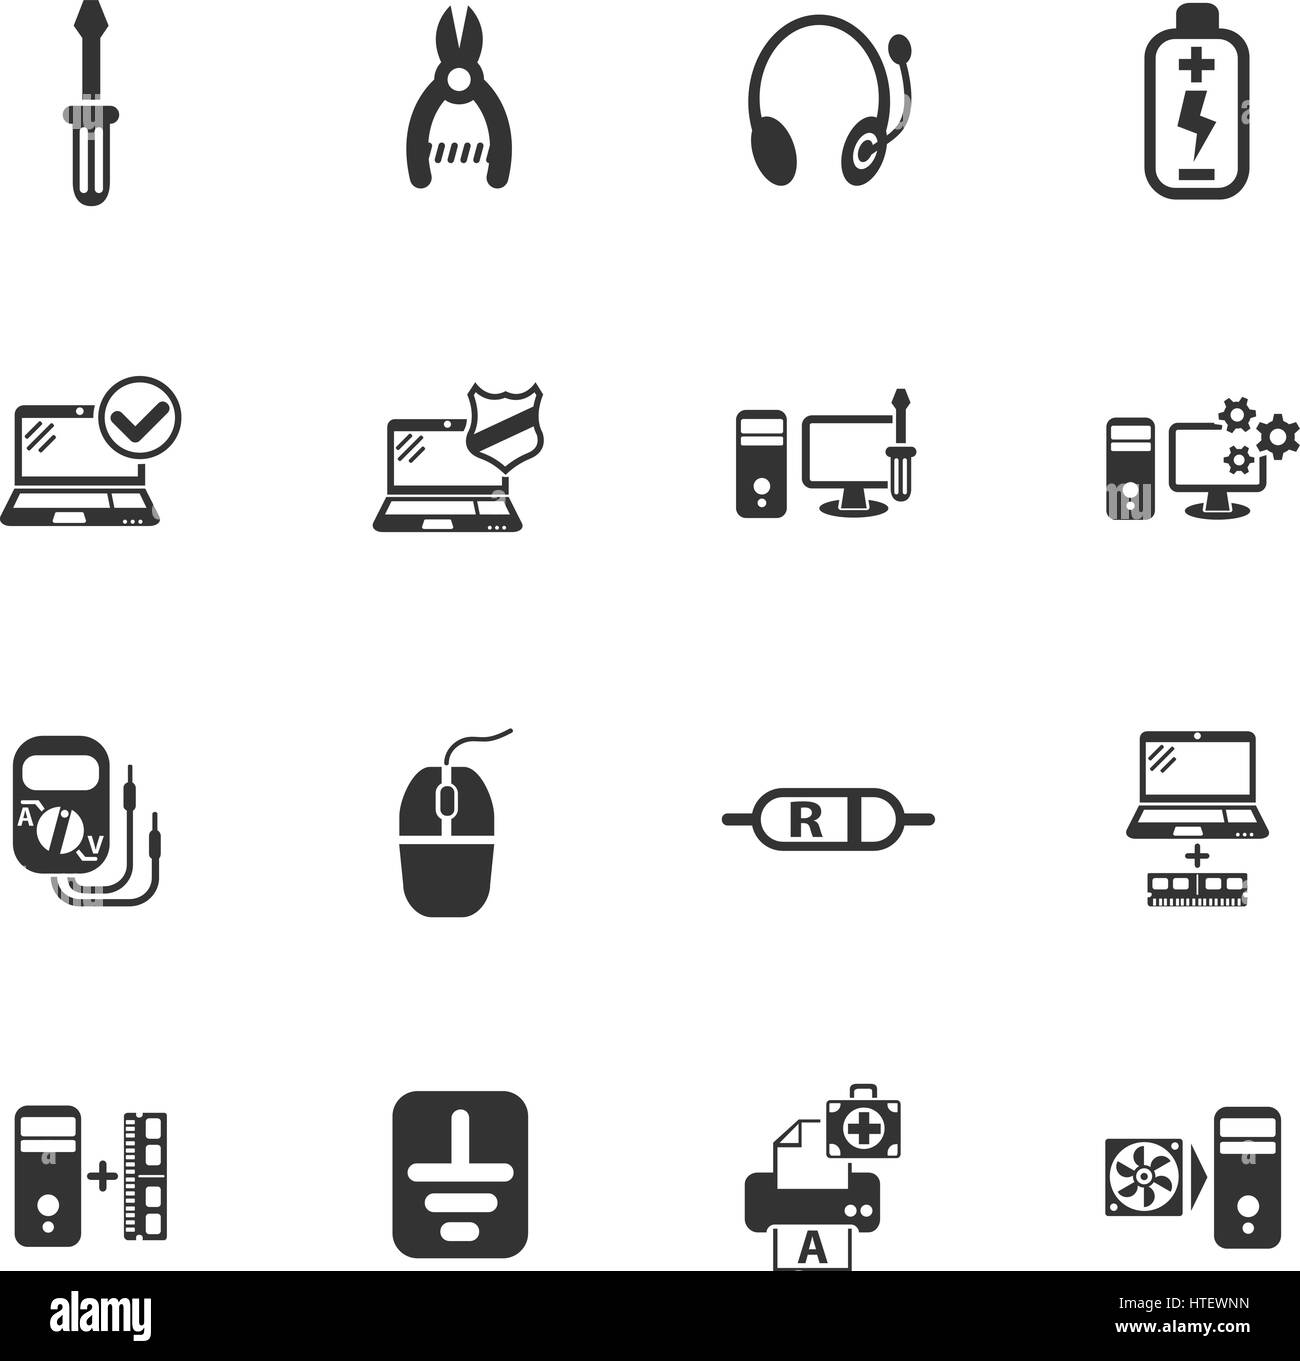 computer repair web icons for user interface design Stock Vector